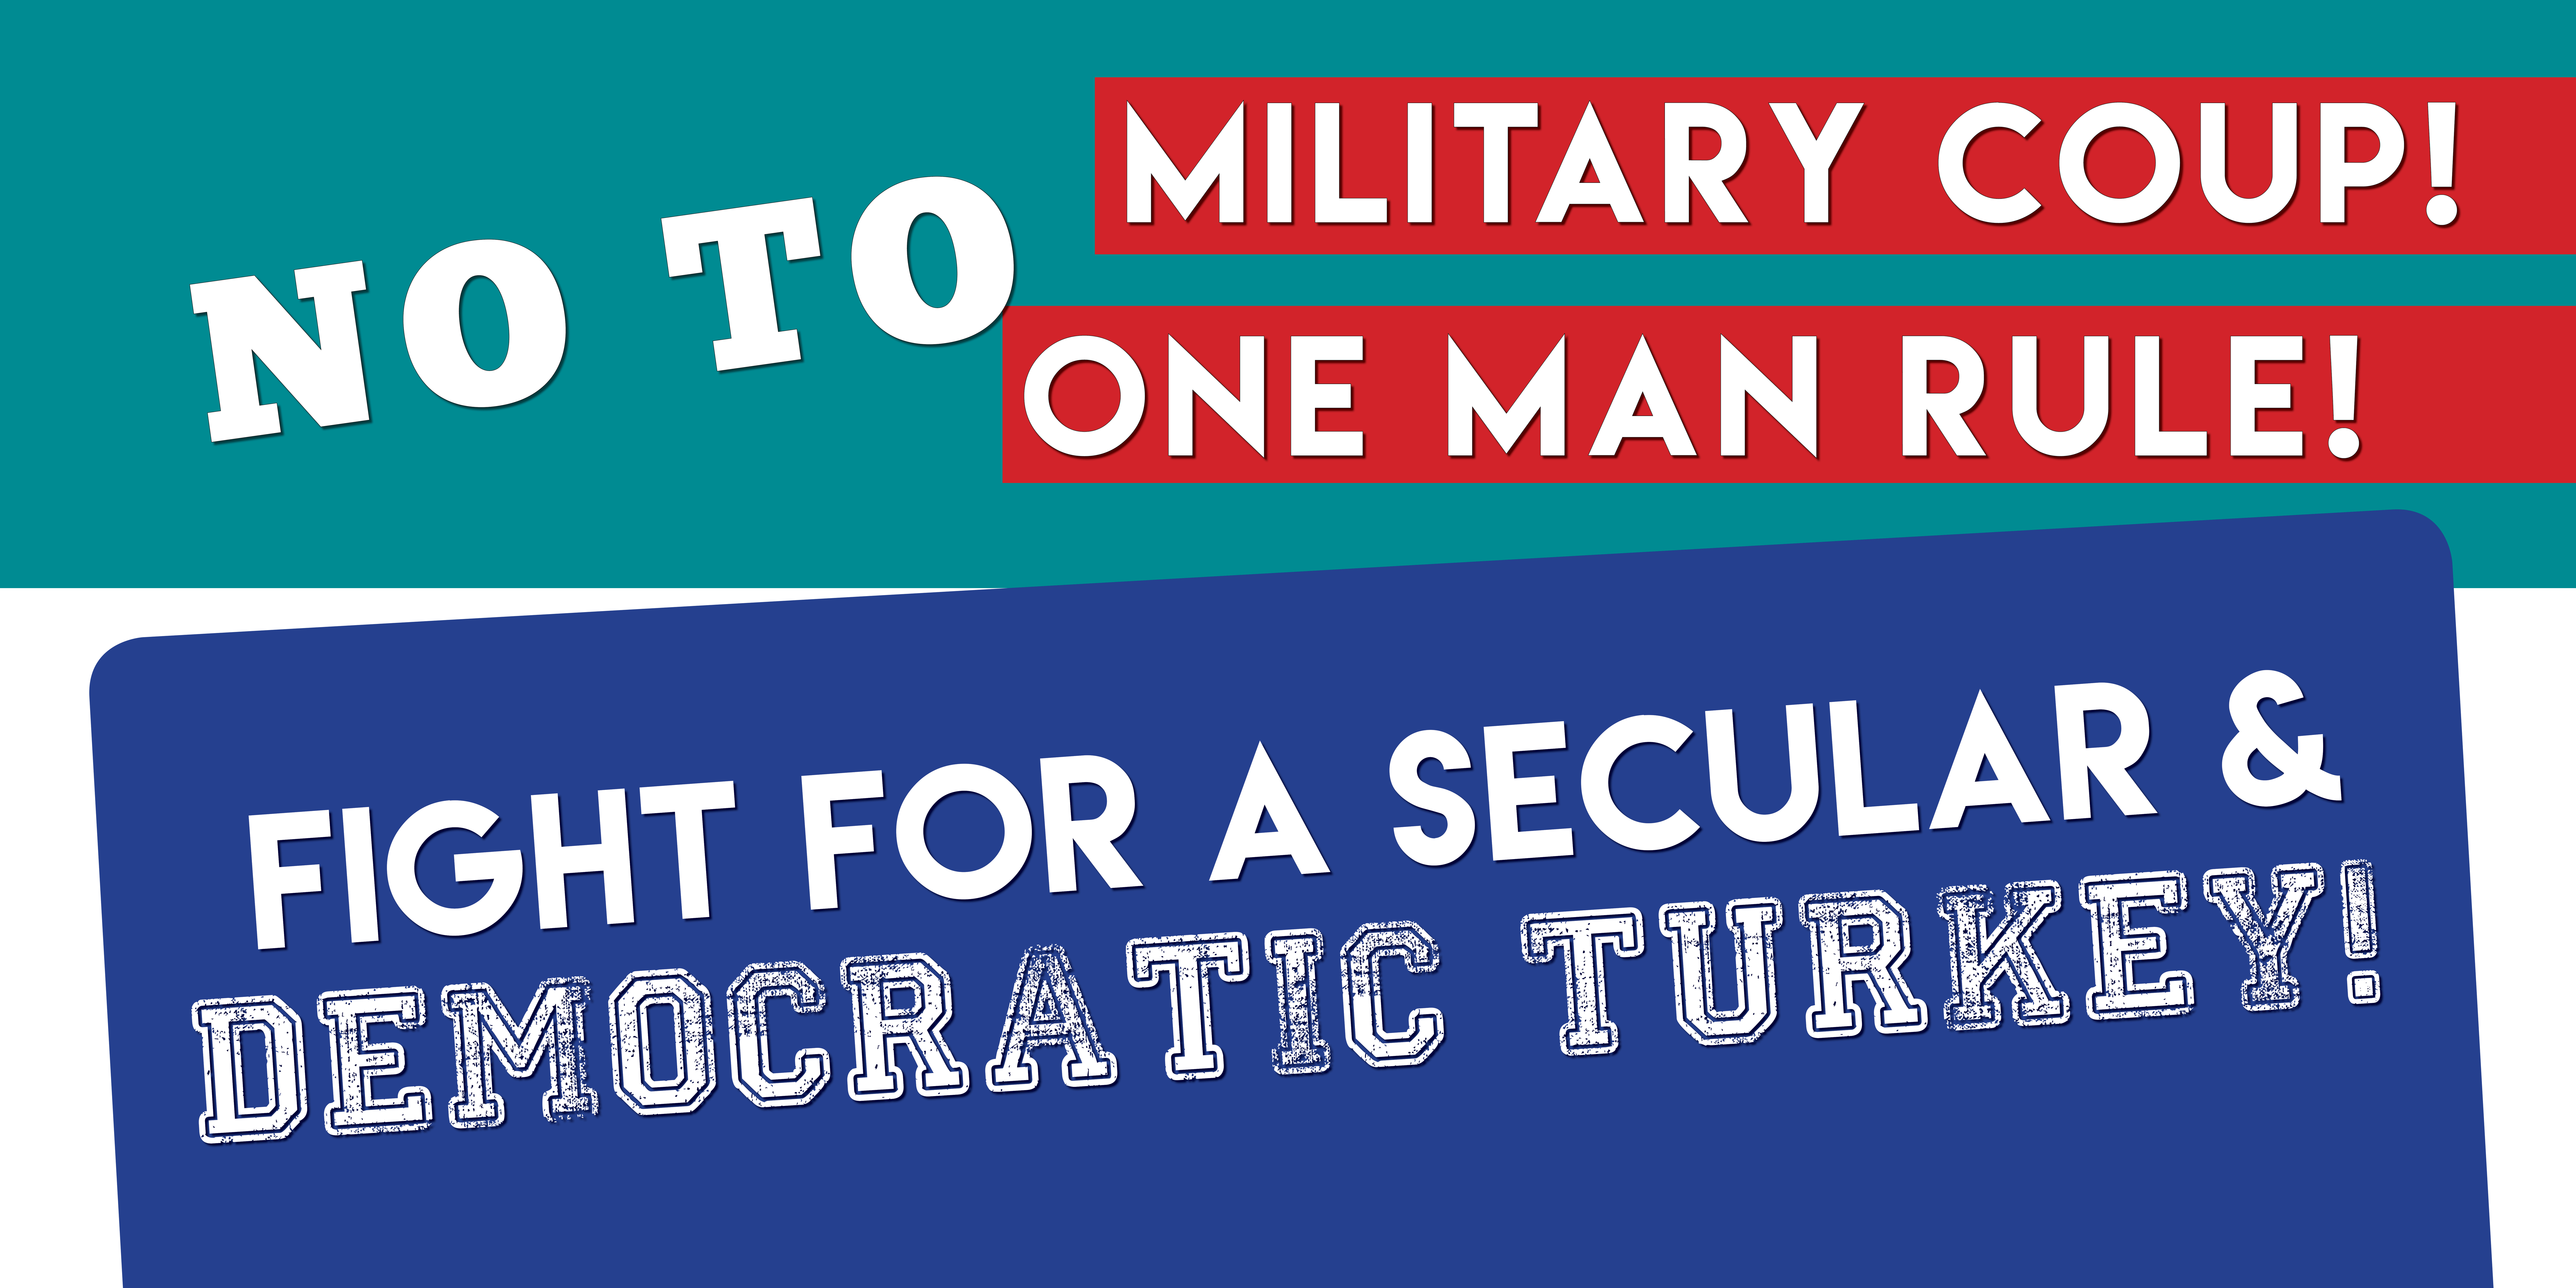 No to military coup, no to one man rule. Fight for a secular & democratic Turkey